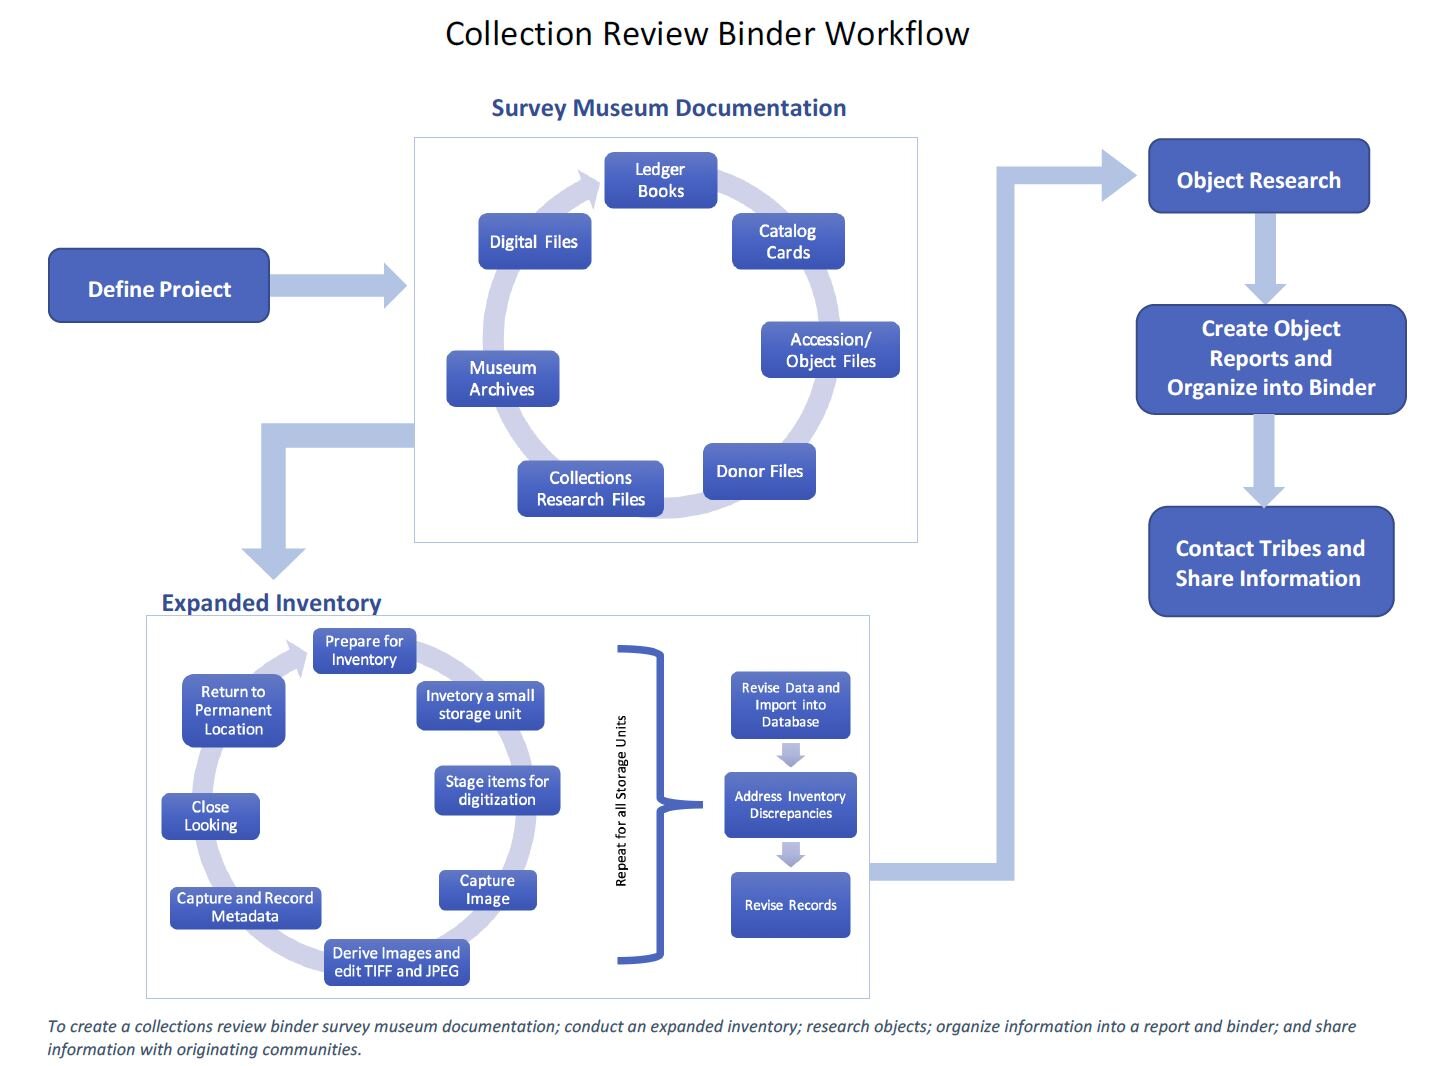 Figure 2: Emma Noffsinger’s workflow guiding collections managers om preparing collections for community collaboration.